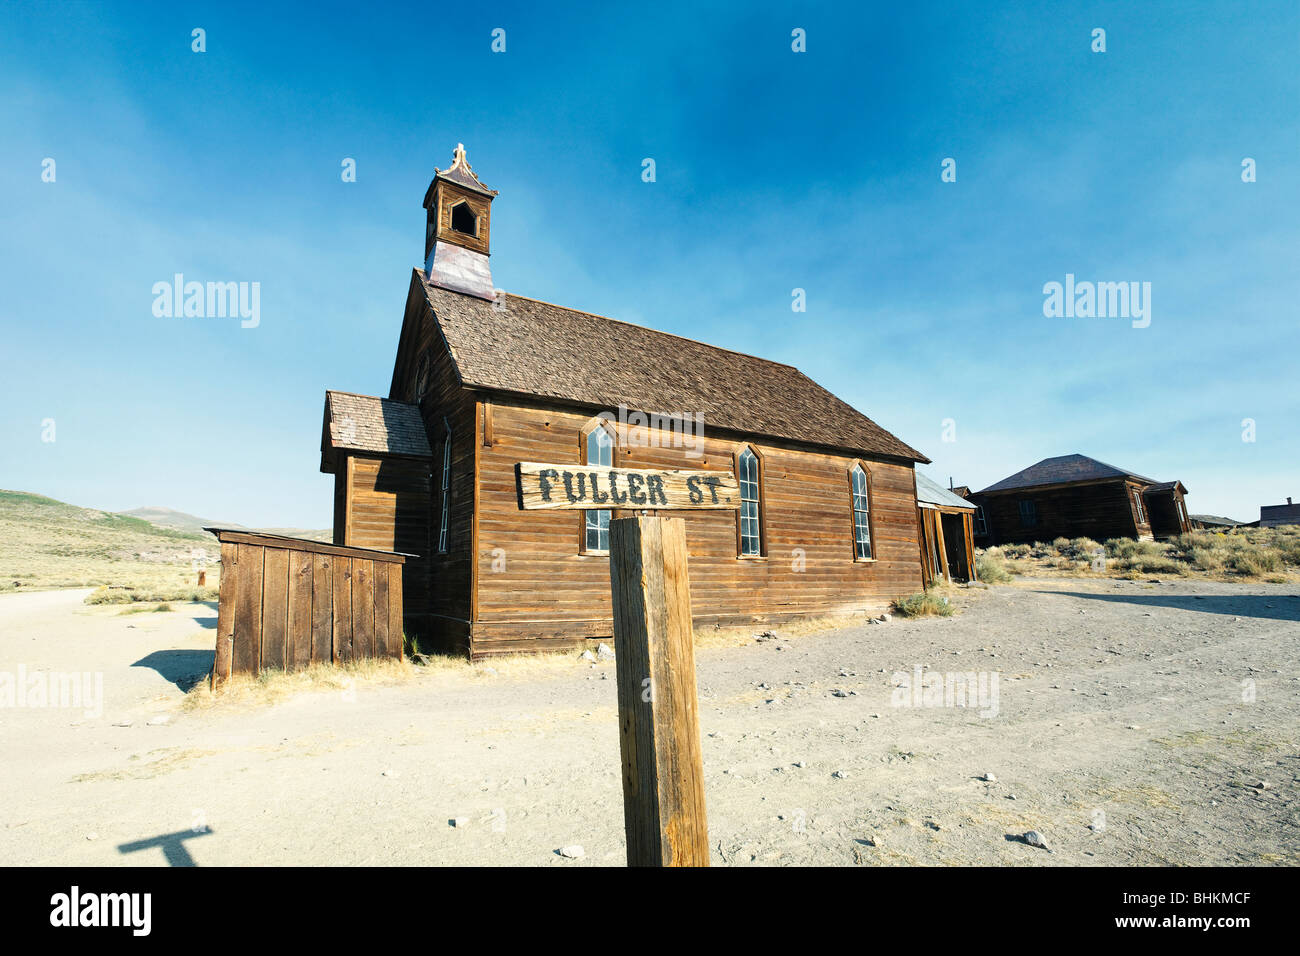 Street Sign and Church, Bodie State Historic Park, California Stock Photo